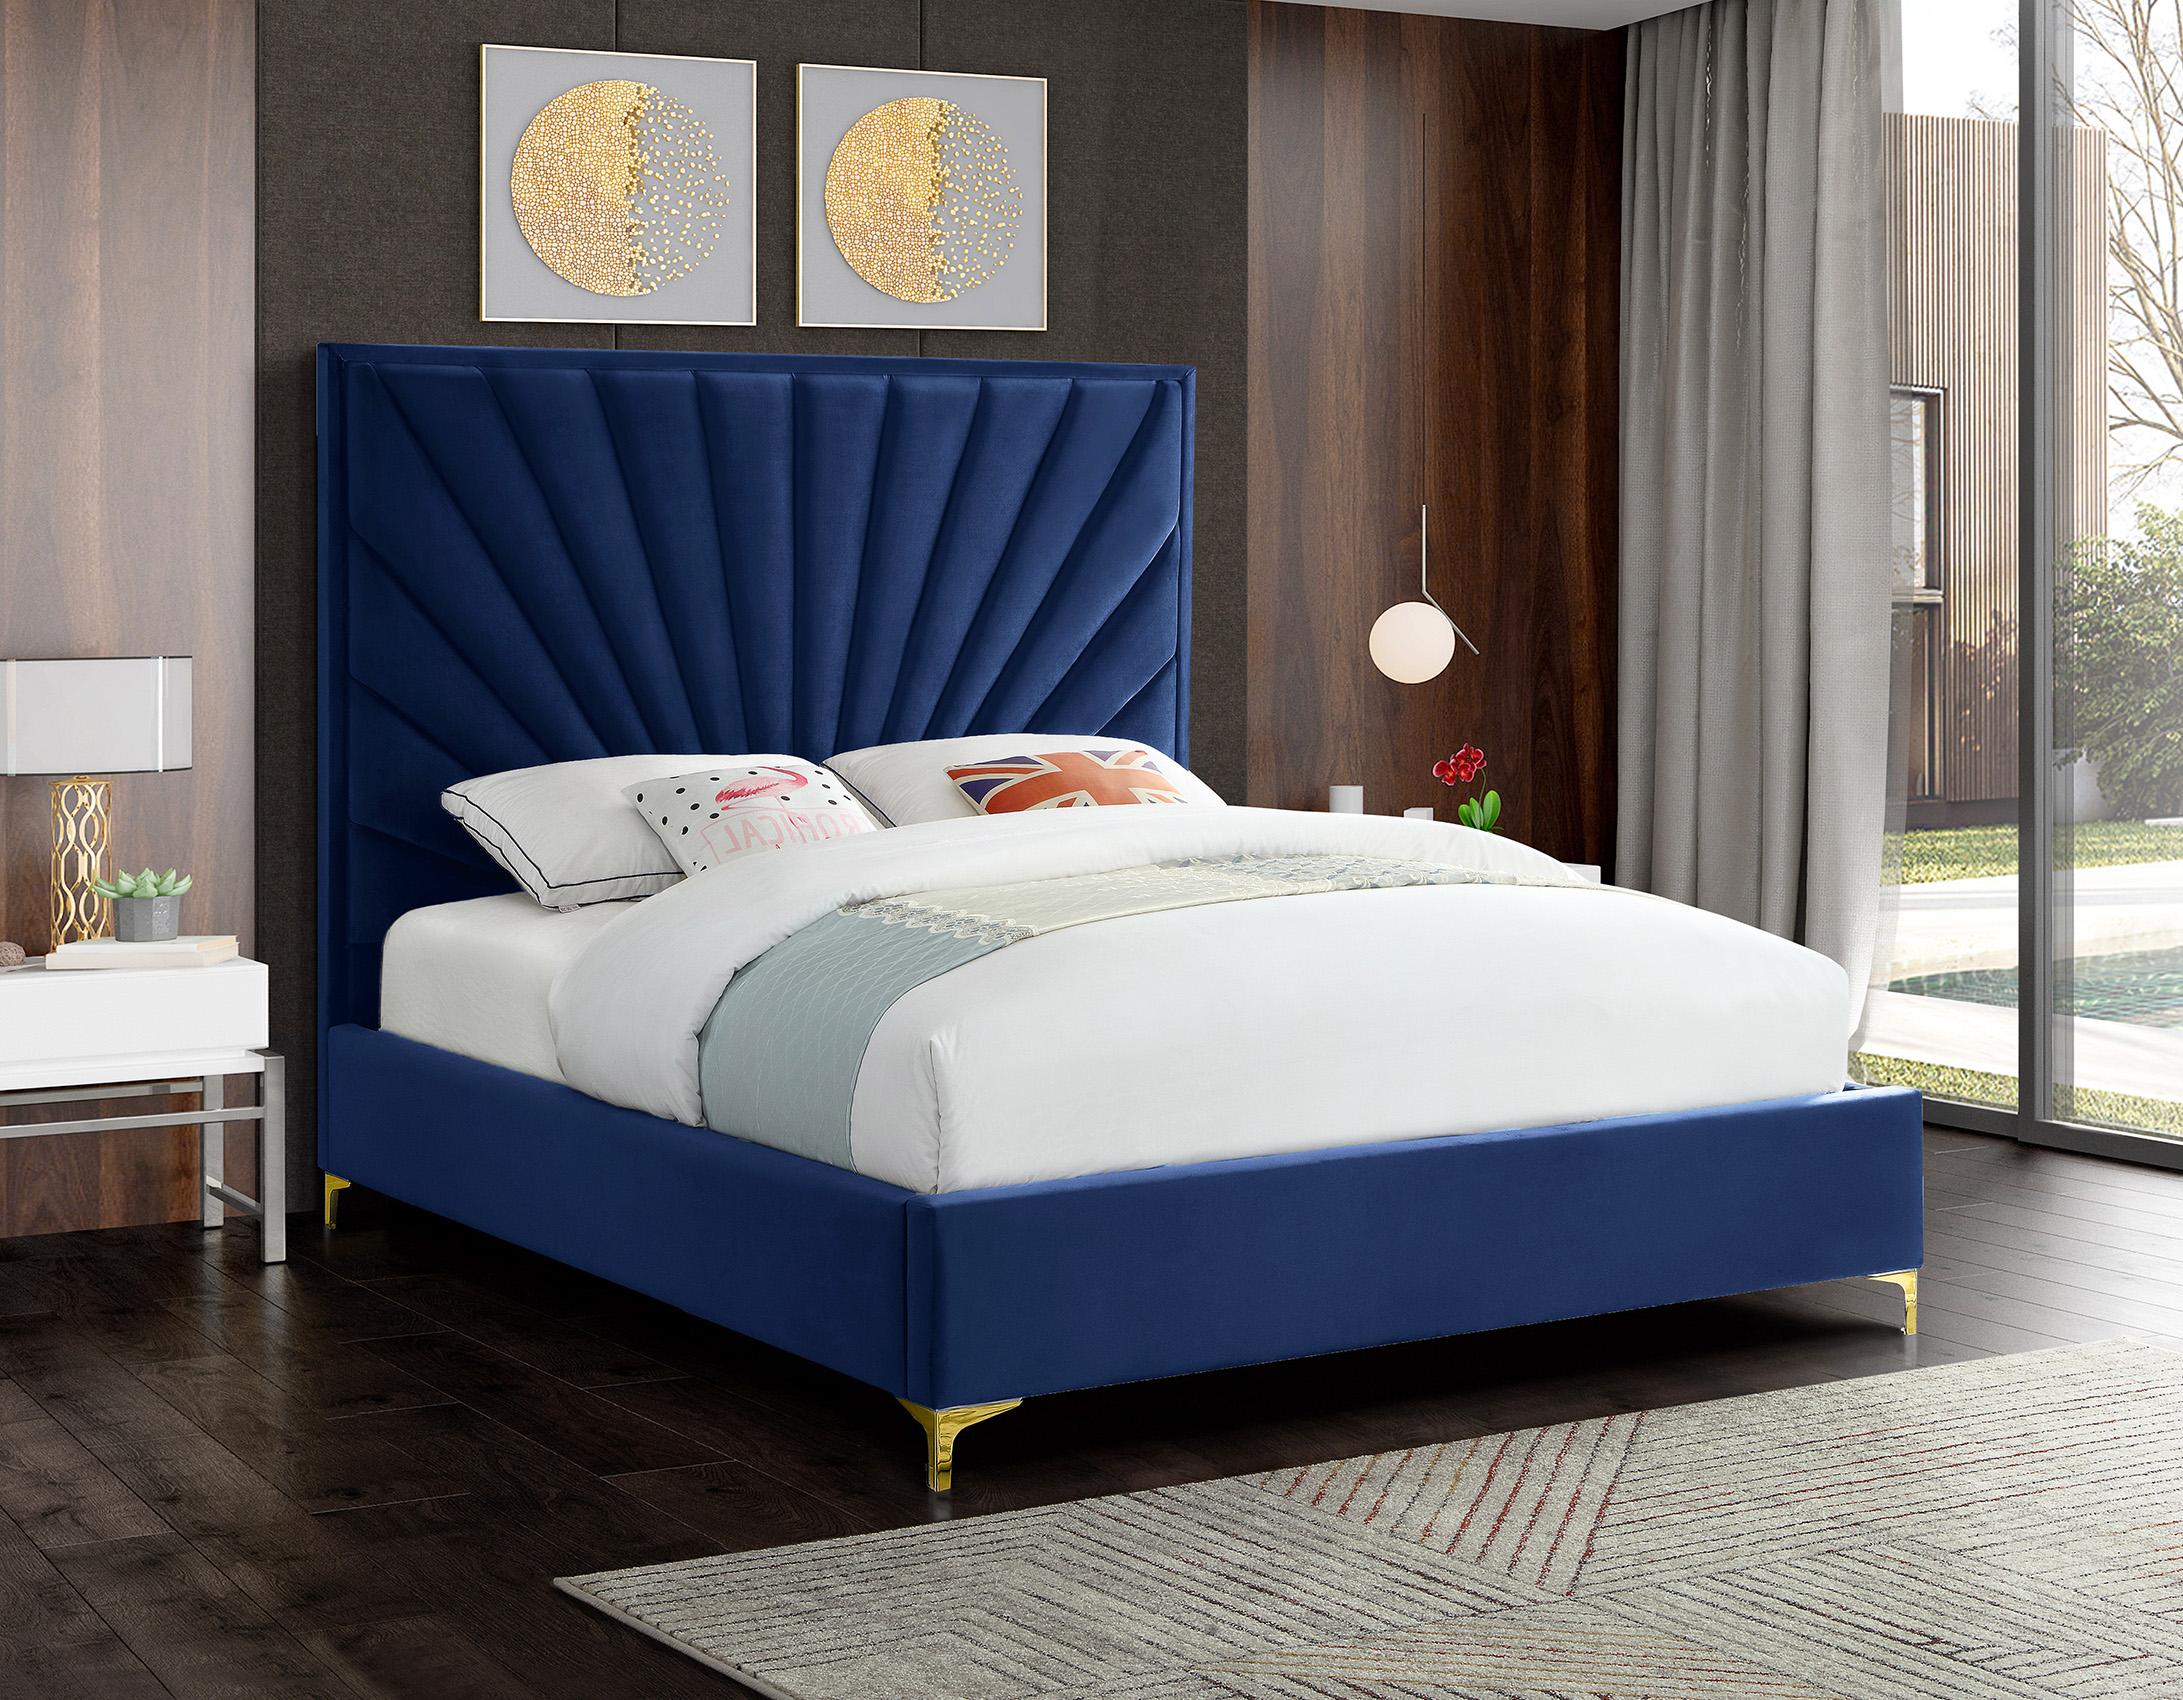 

    
Luxurious Navy Velvet Tufted Queen Bed ECLIPSE Meridian Contemporary Modern
